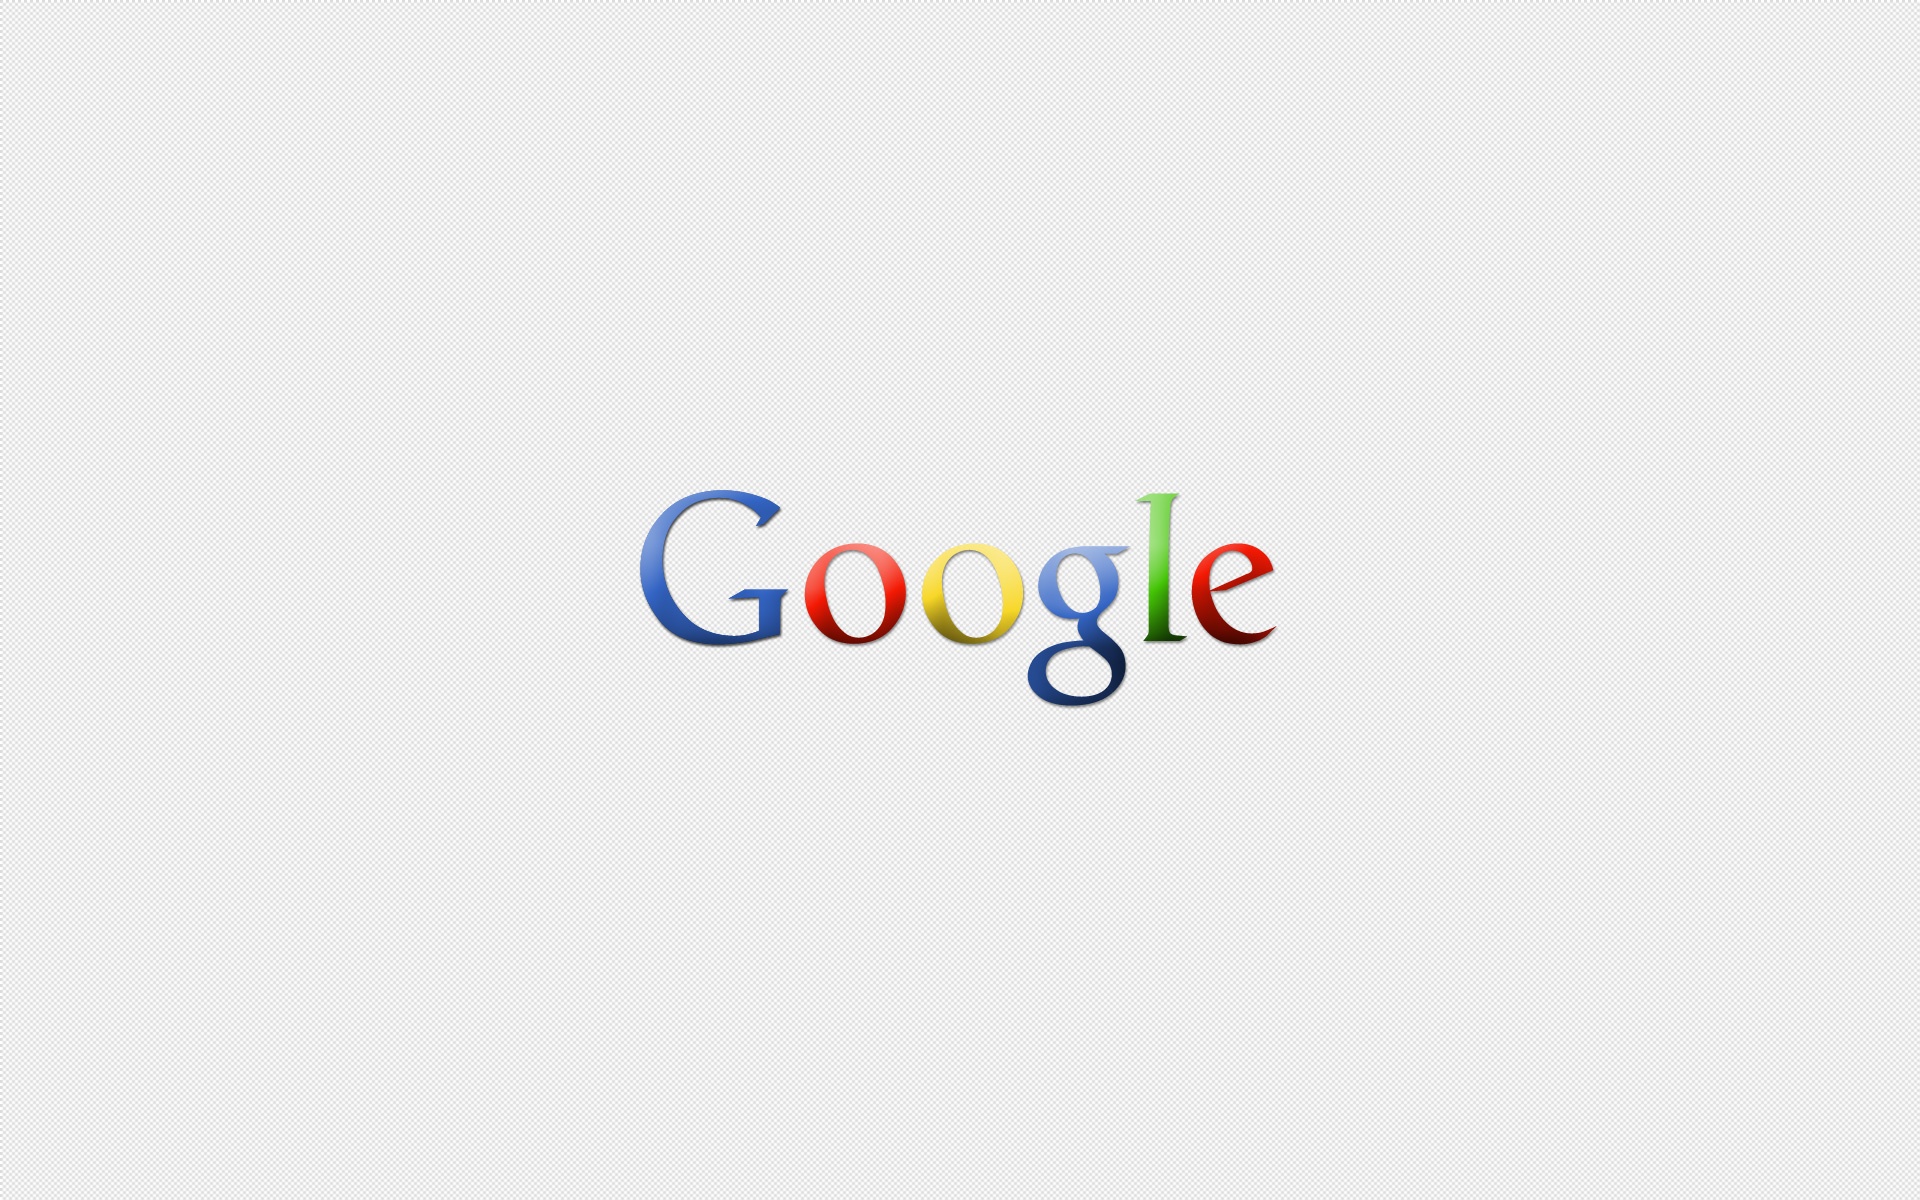 Google Search Wallpaper And Image Pictures